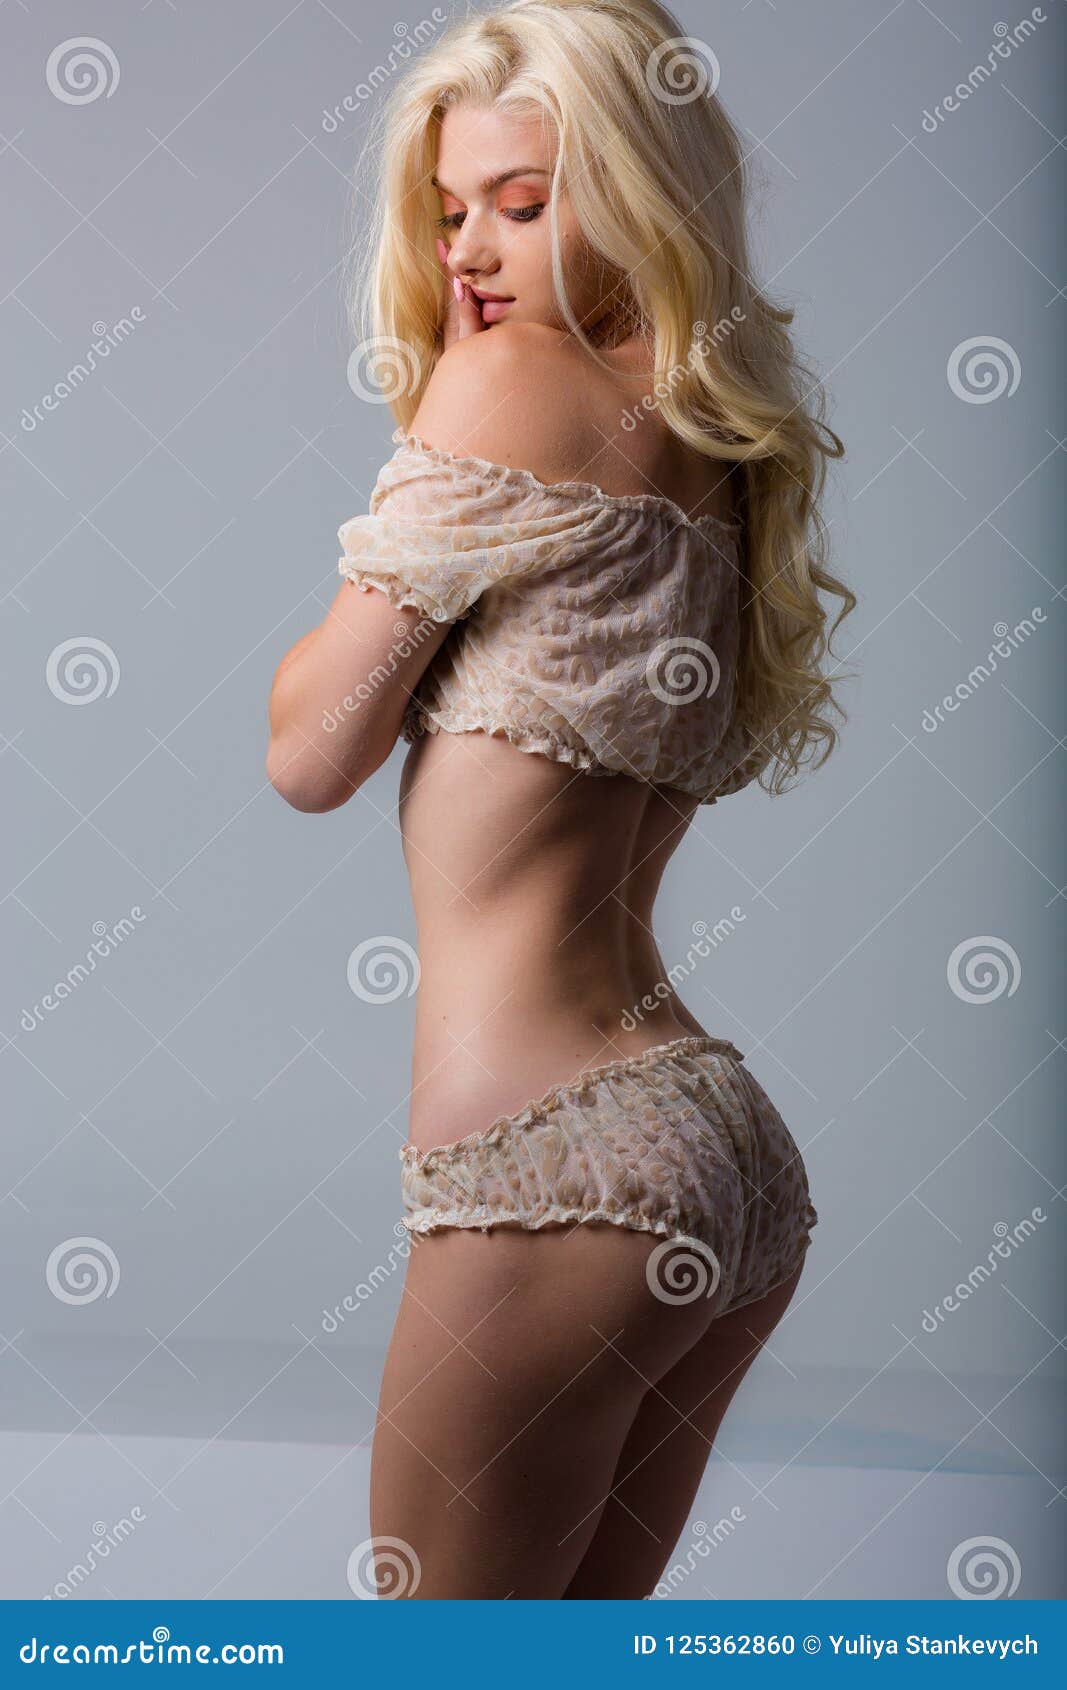 Woman Wearing Nude Lingerie Stock Photo